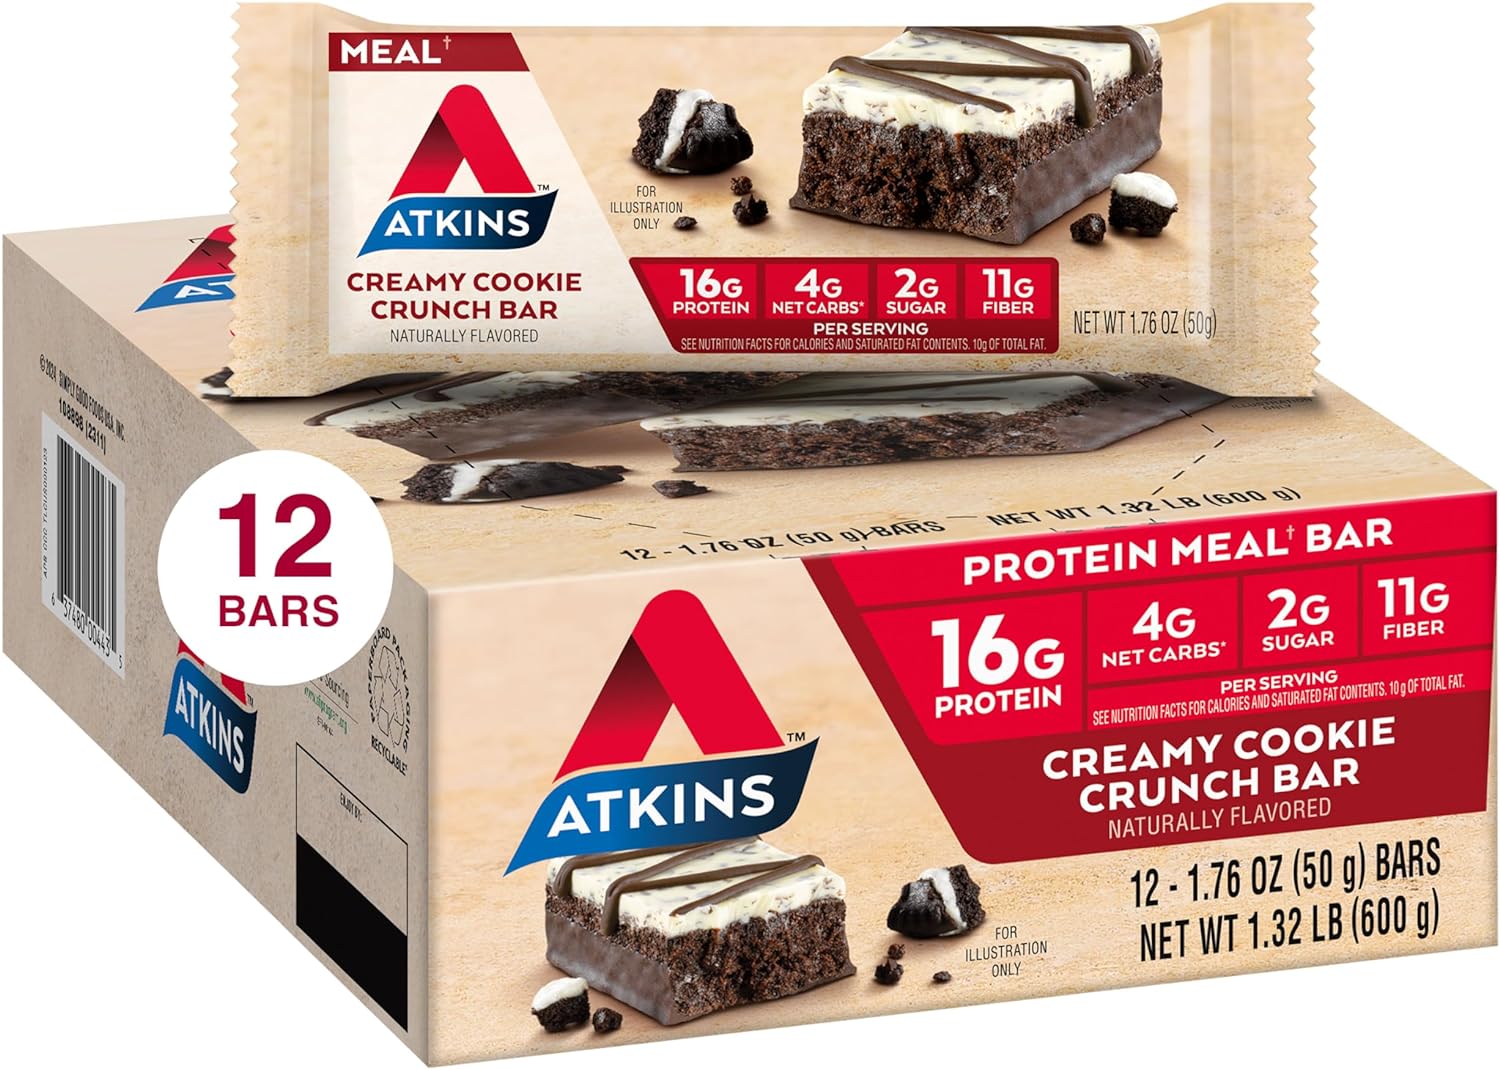 Atkins Creamy Cookie Crunch Meal Bars, 16g Protein, 11g Fiber, 2g Sugar, 4g Net Carbs, Low Carb, 12 Count